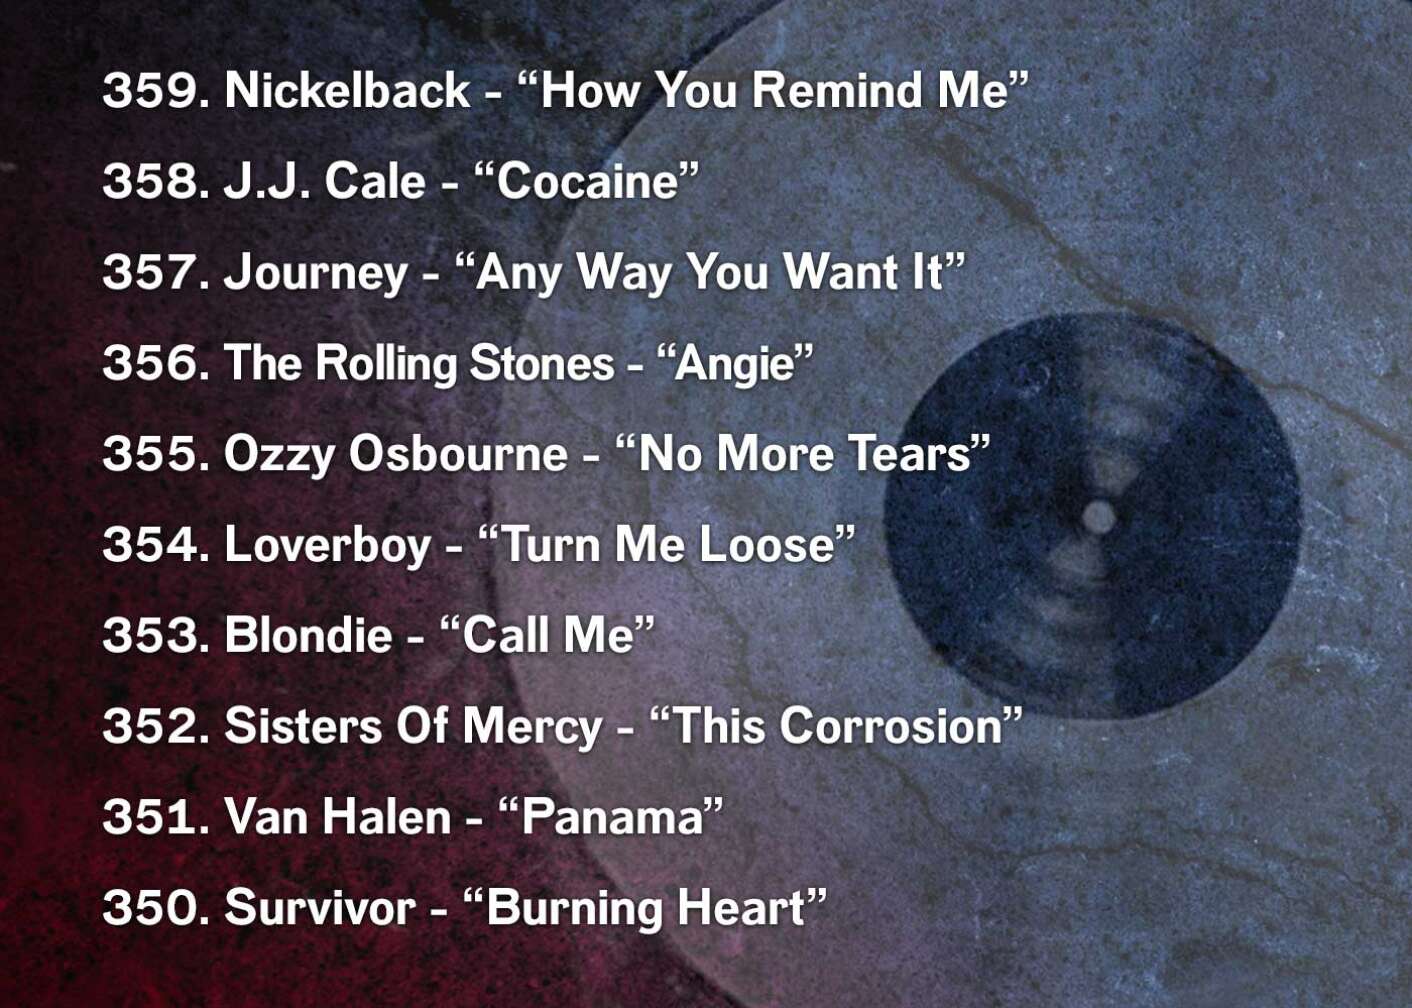 359. Nickelback - “How You Remind Me” 358. J.J. Cale	 - “Cocaine” 357. Journey - “Any Way You Want It” 356. The Rolling Stones - “Angie” 355. Ozzy Osbourne - “No More Tears” 354. Loverboy - “Turn Me Loose” 353. Blondie - “Call Me” 352. Sisters Of Mercy - “This Corrosion” 351. Van Halen - “Panama” 350. Survivor - “Burning Heart”